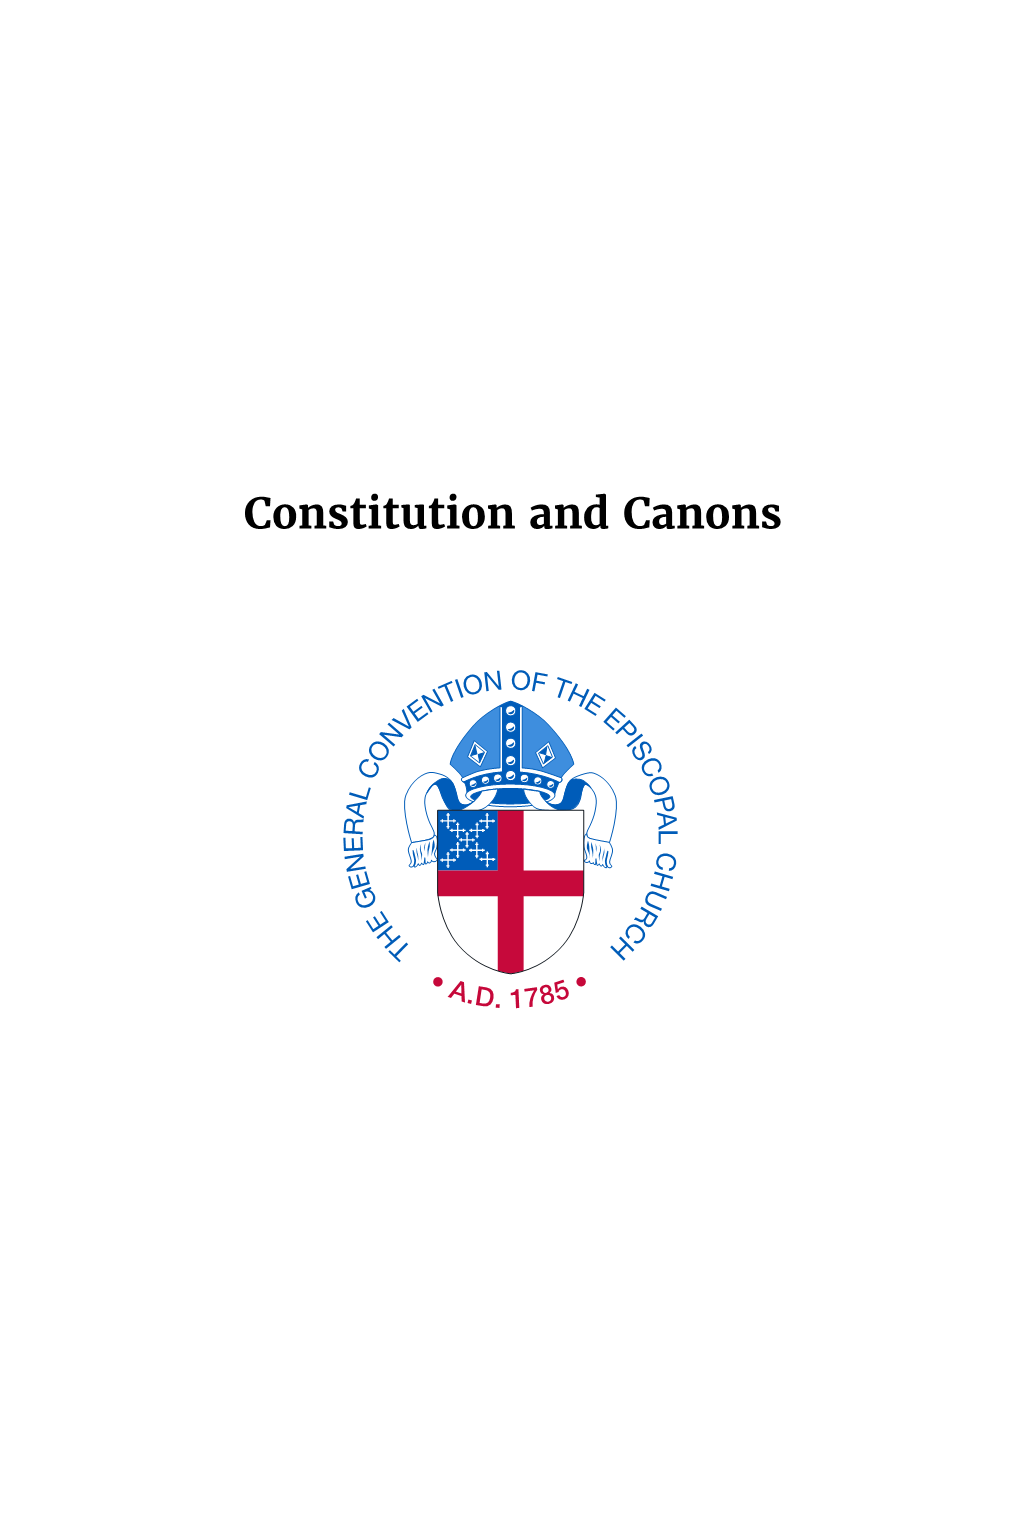 Constitutions & Canons of the Episcopal Church